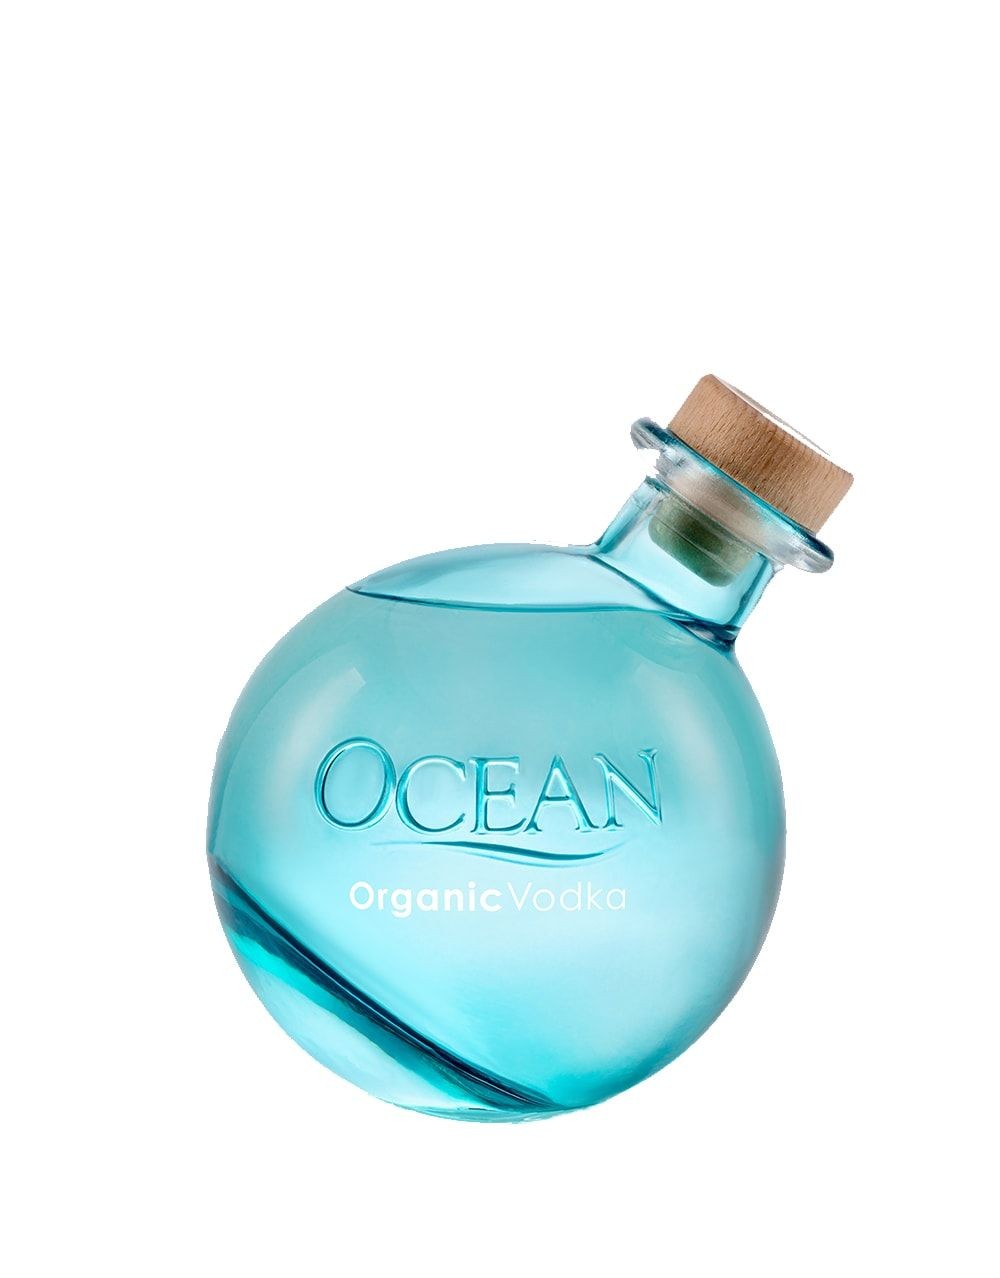 Ocean Organic Vodka from Maui Buy Online or Send as a